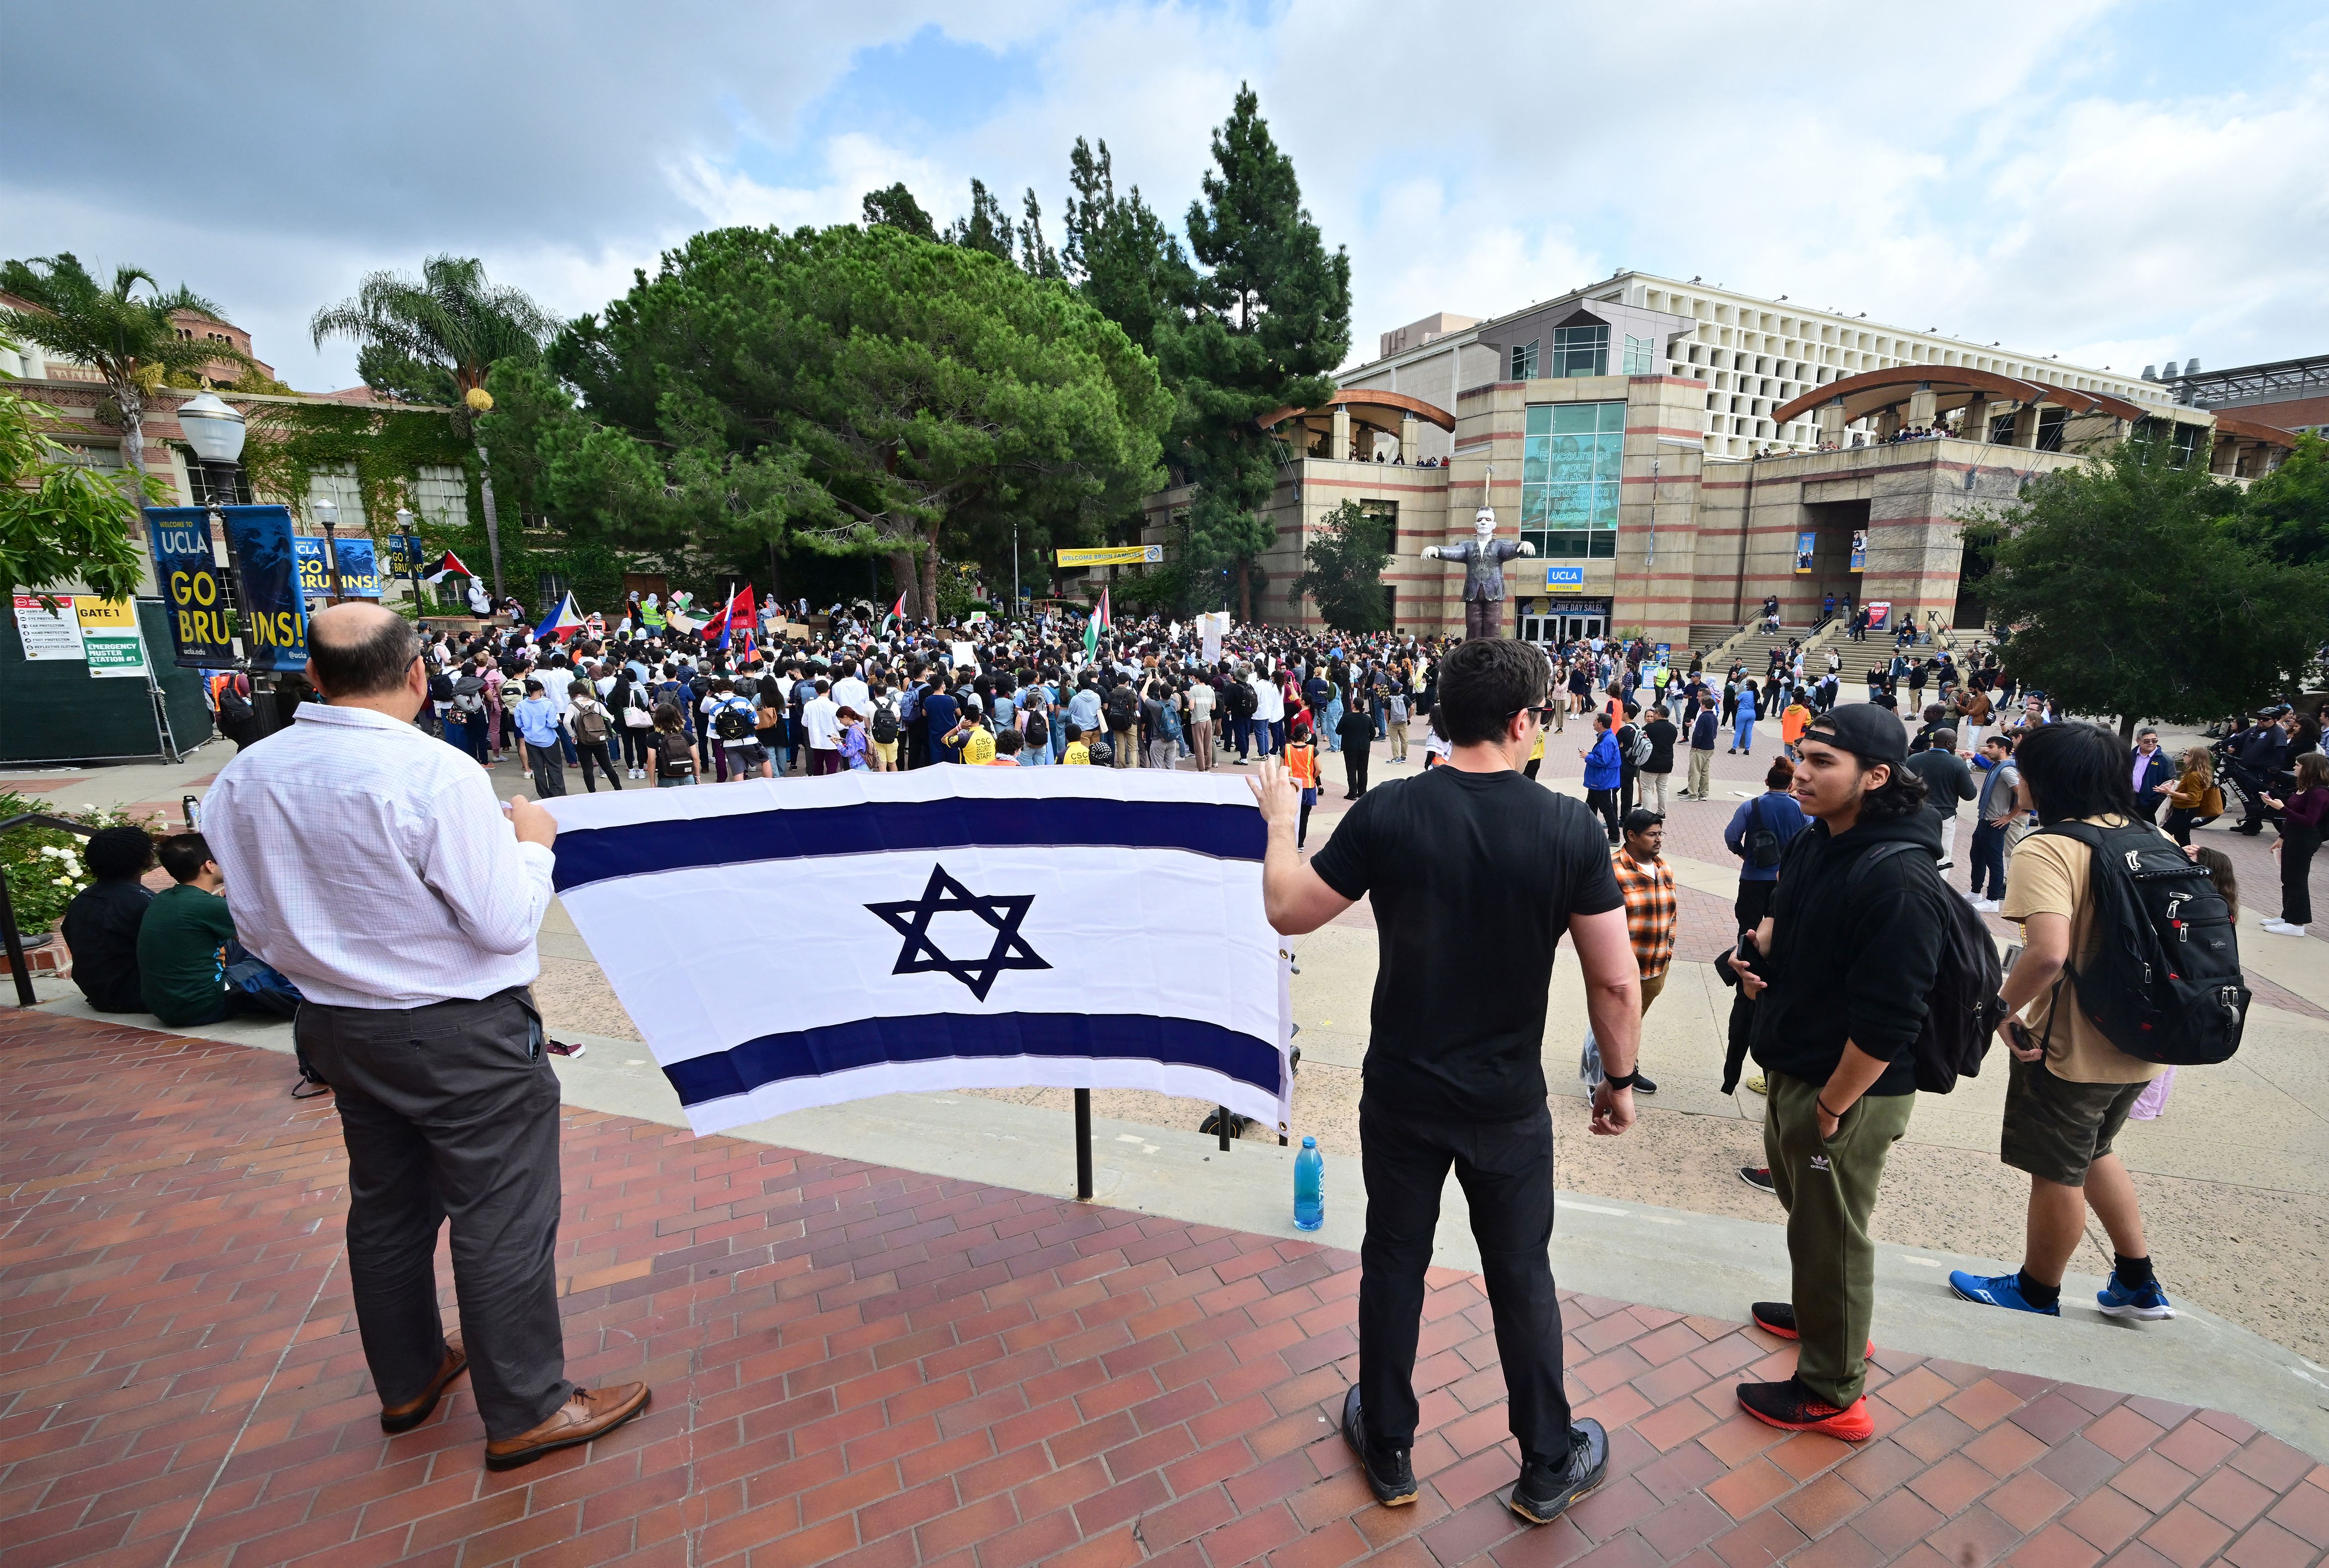 UC leaders maintain their condemnation of the Oct. 7 Hamas attack on Israel.